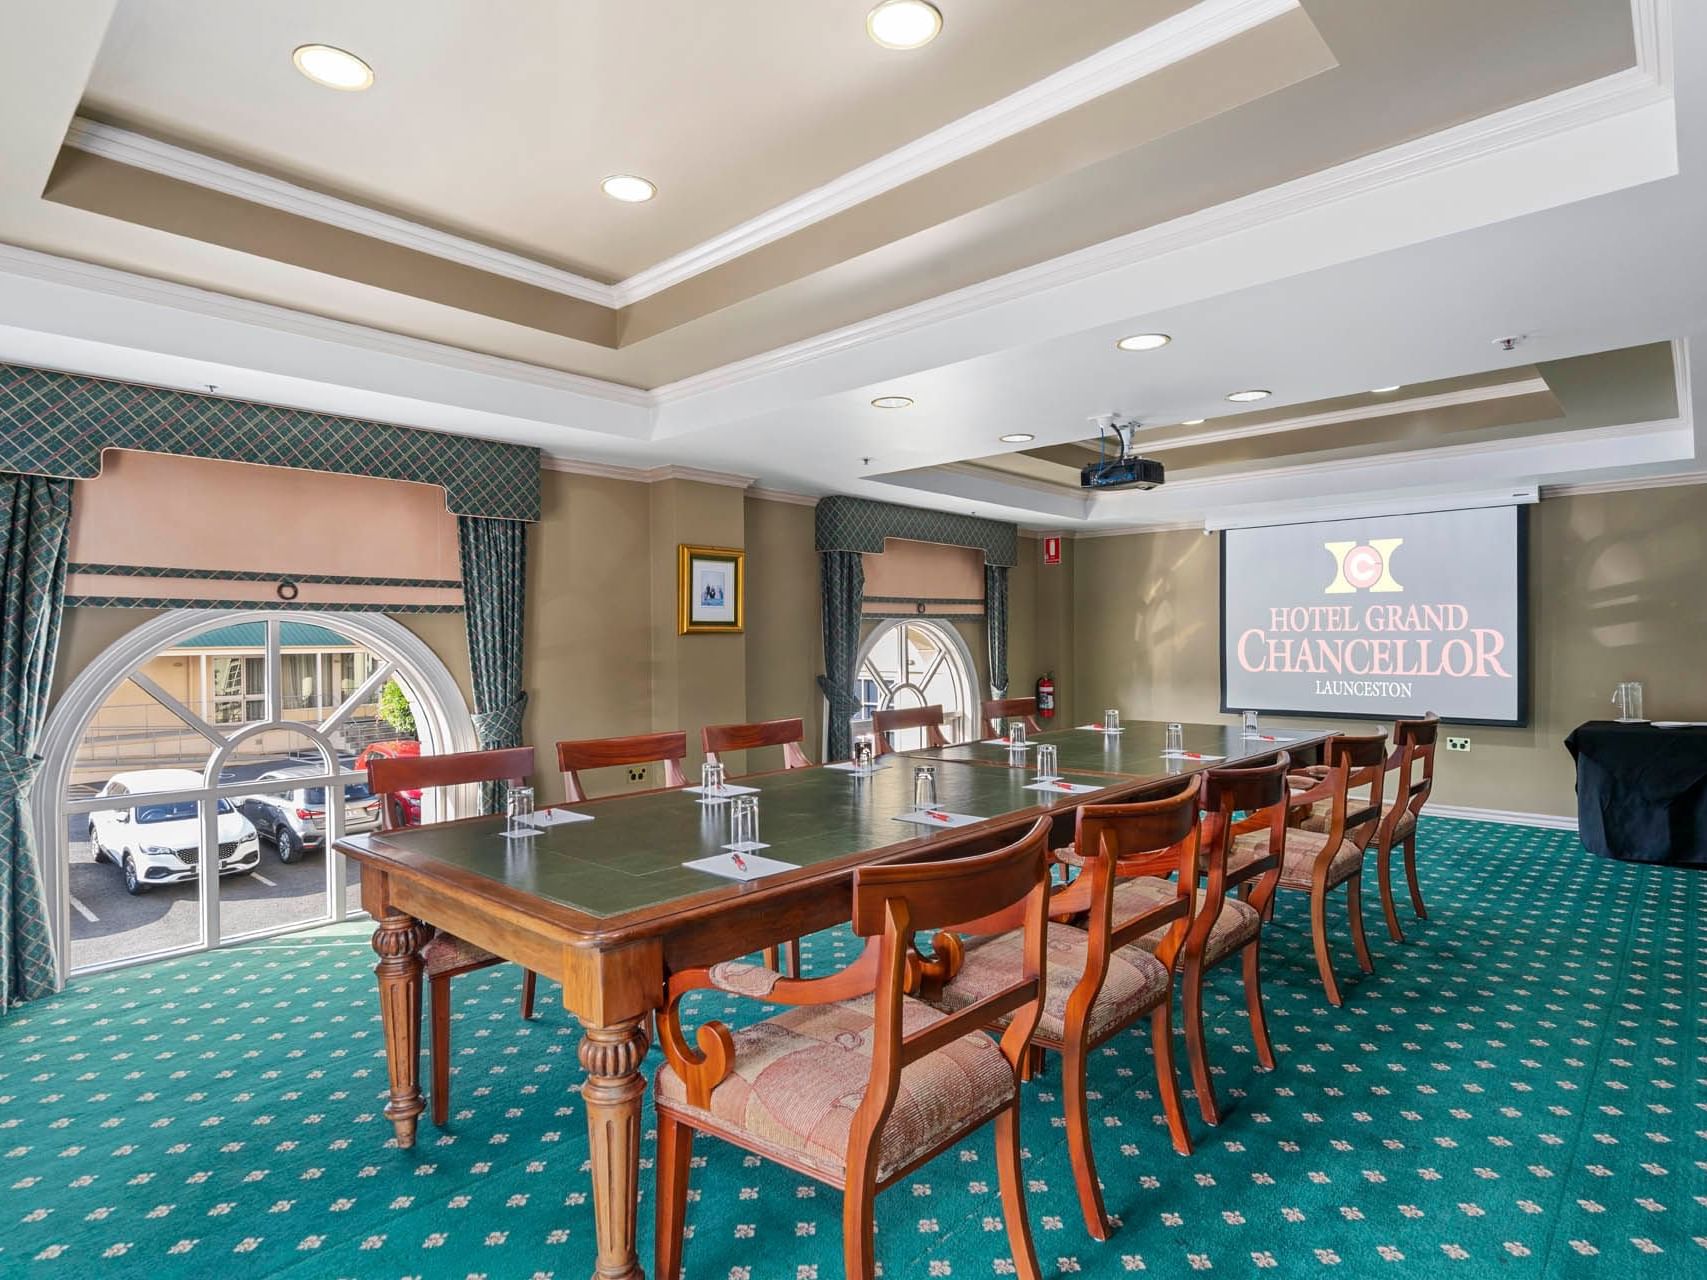 Boardroom set-up on matted floor with projector in Chancellor 8 at Hotel Grand Chancellor Launceston